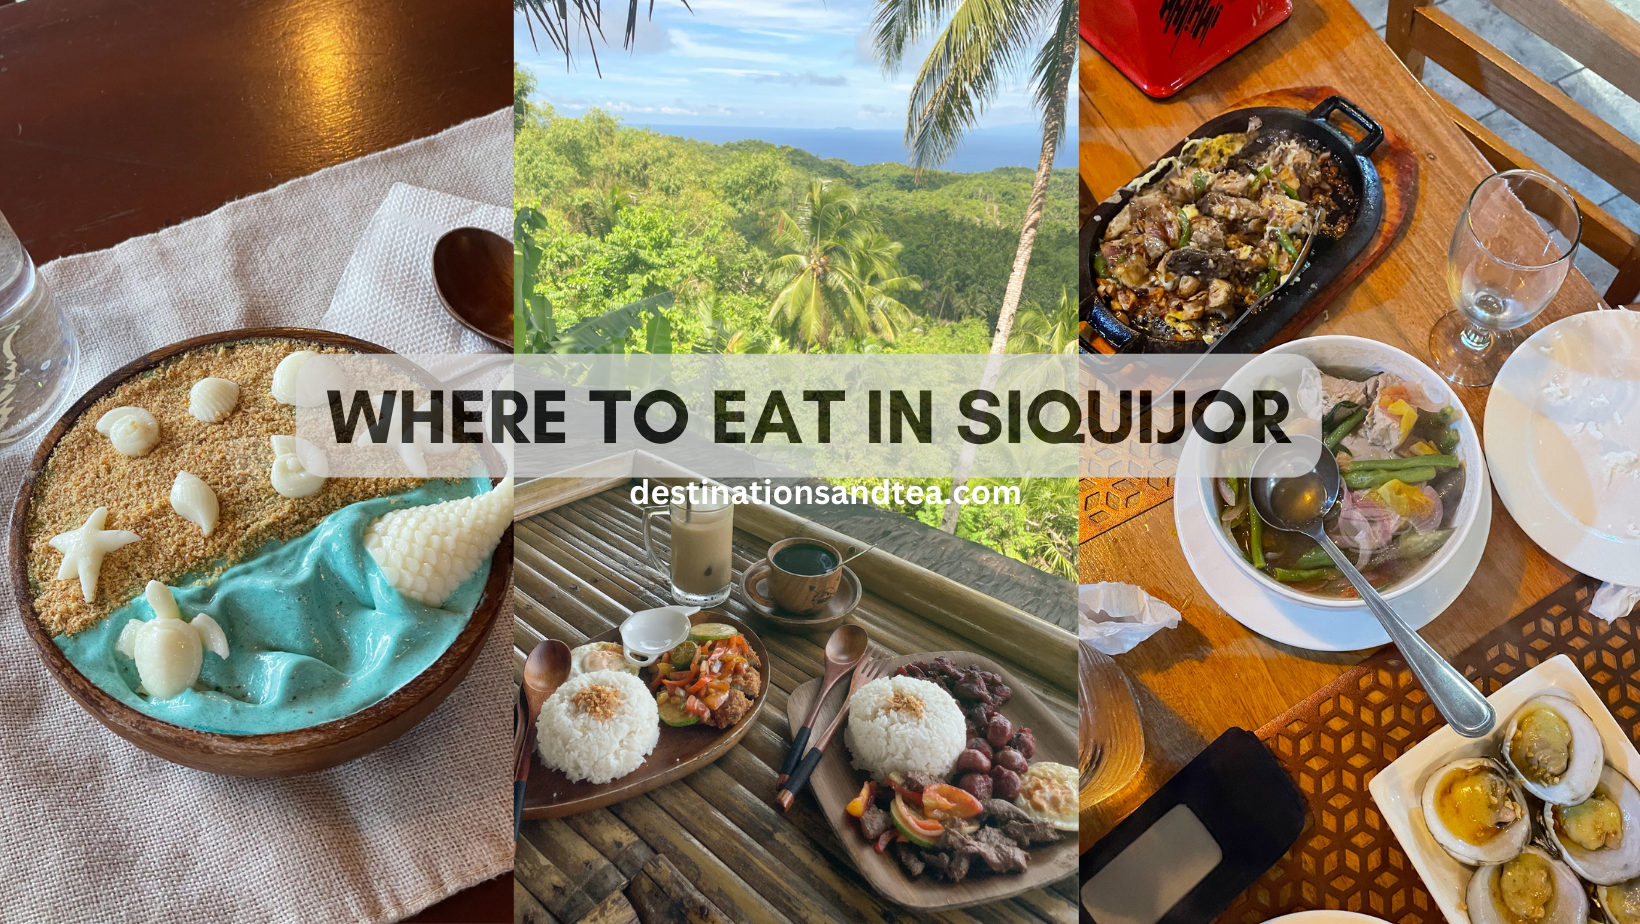 10 Restaurants & Cafes To Visit In Siquijor – Travel Guide 2023